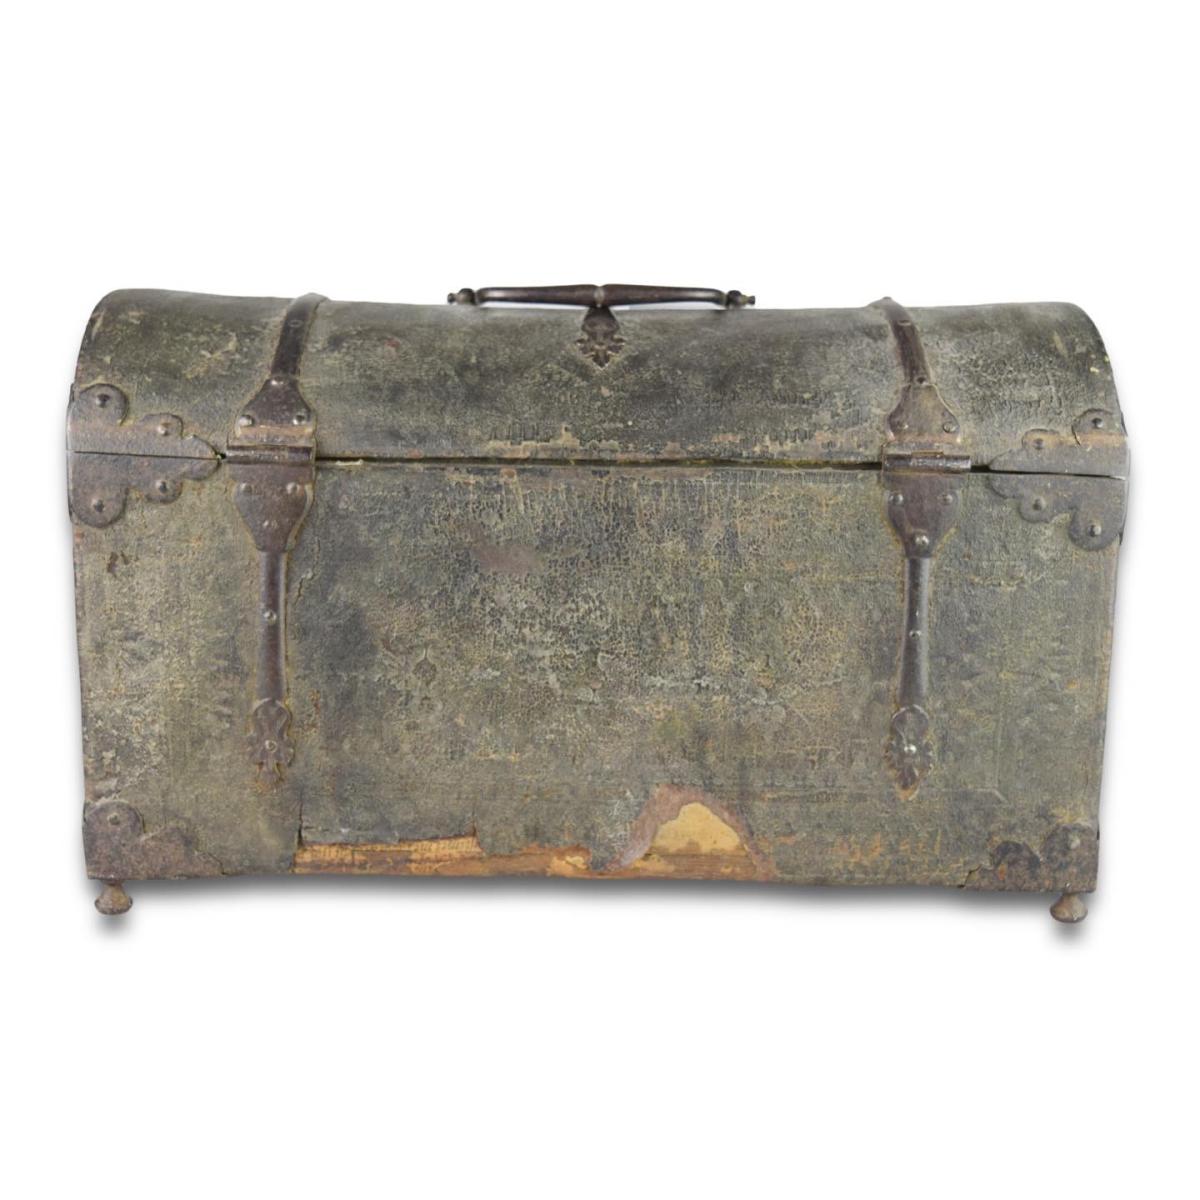 Iron mounted cuir bouilli casket. French, late 16th century